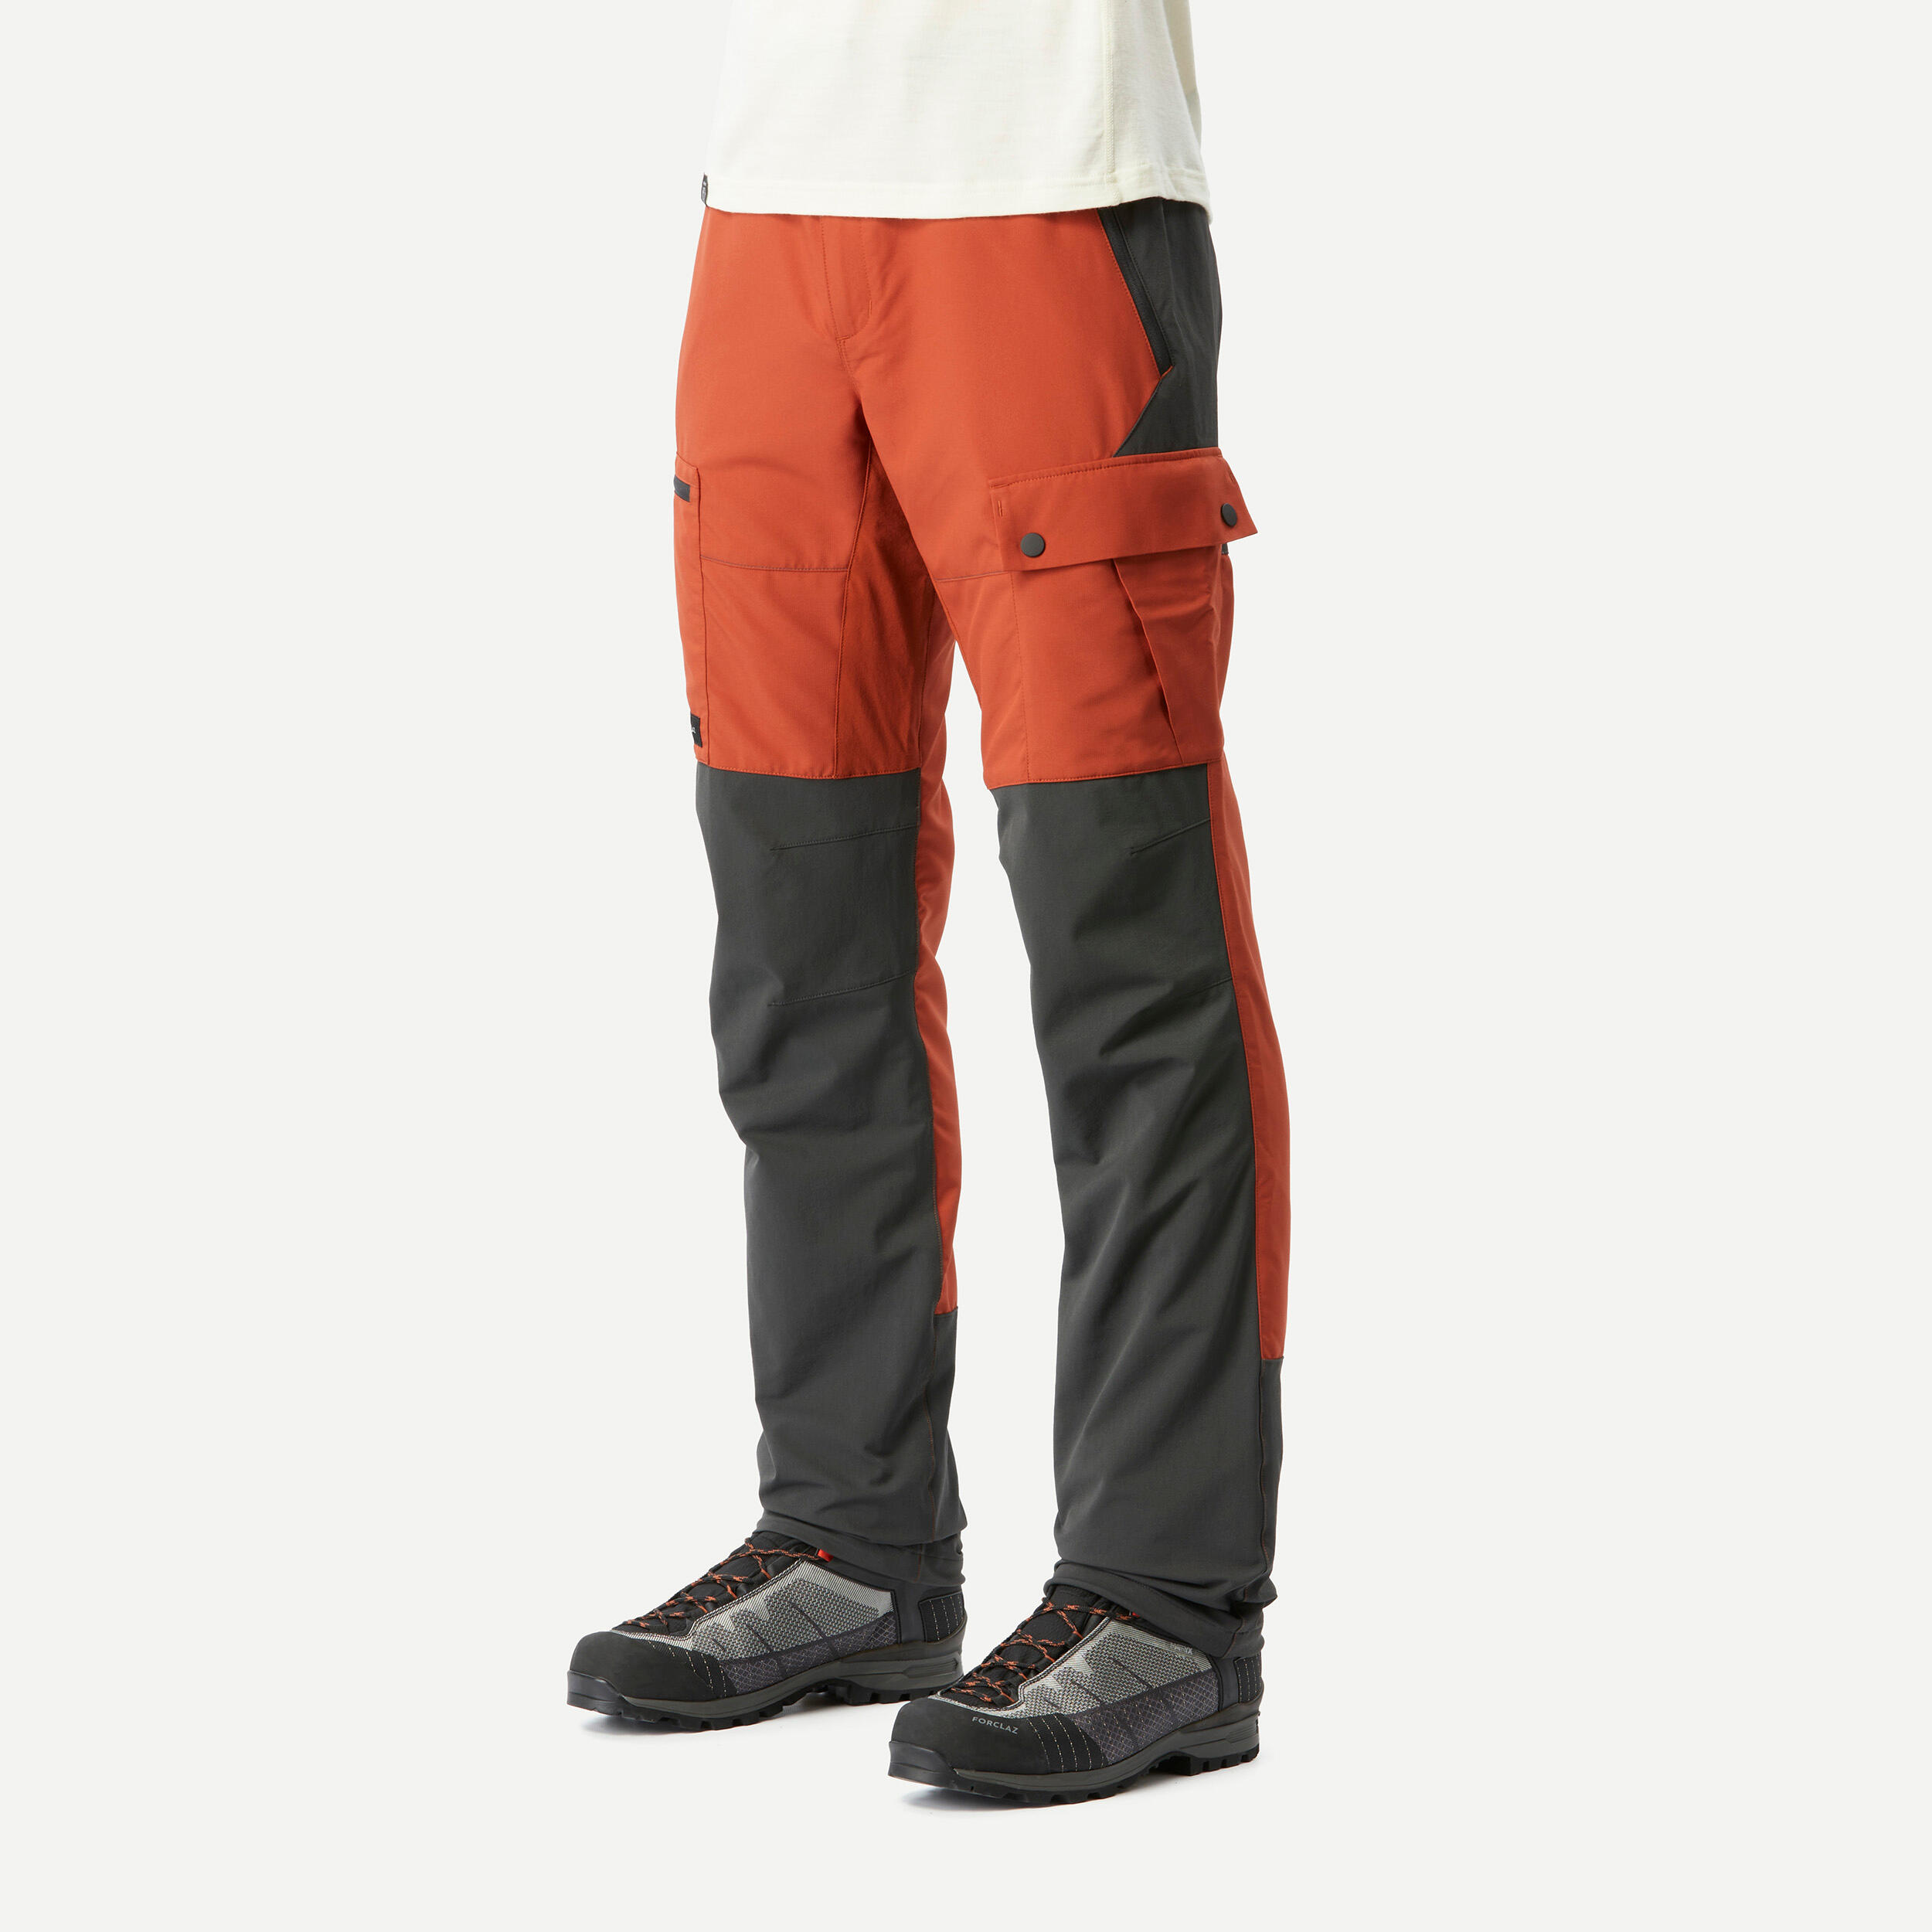 Men's Hiking Pants, Free Delivery